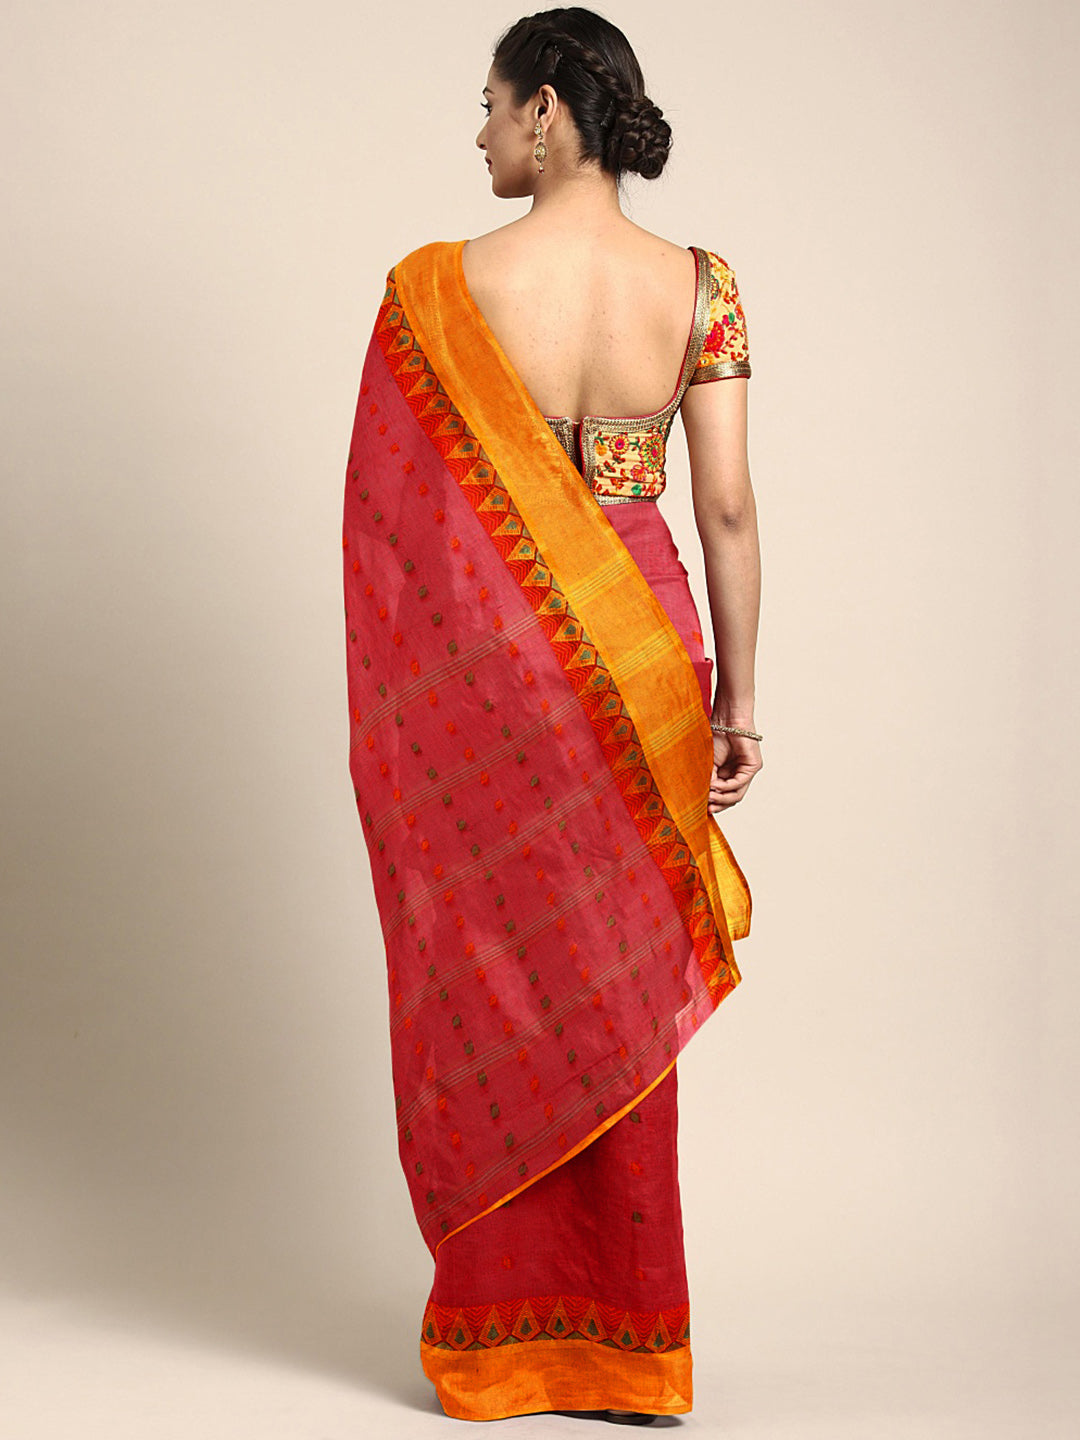 Red Tant Woven Design Saree Without Blouse Piece DUTASA021 DUTASA021-Saree-Kalakari India-DUTASA021-Geographical Indication, Hand Crafted, Heritage Prints, Natural Dyes, Sarees, Silk Cotton, Sustainable Fabrics, Taant, Tant, West Bengal, Woven-[Linen,Ethnic,wear,Fashionista,Handloom,Handicraft,Indigo,blockprint,block,print,Cotton,Chanderi,Blue, latest,classy,party,bollywood,trendy,summer,style,traditional,formal,elegant,unique,style,hand,block,print, dabu,booti,gift,present,glamorous,affordable,